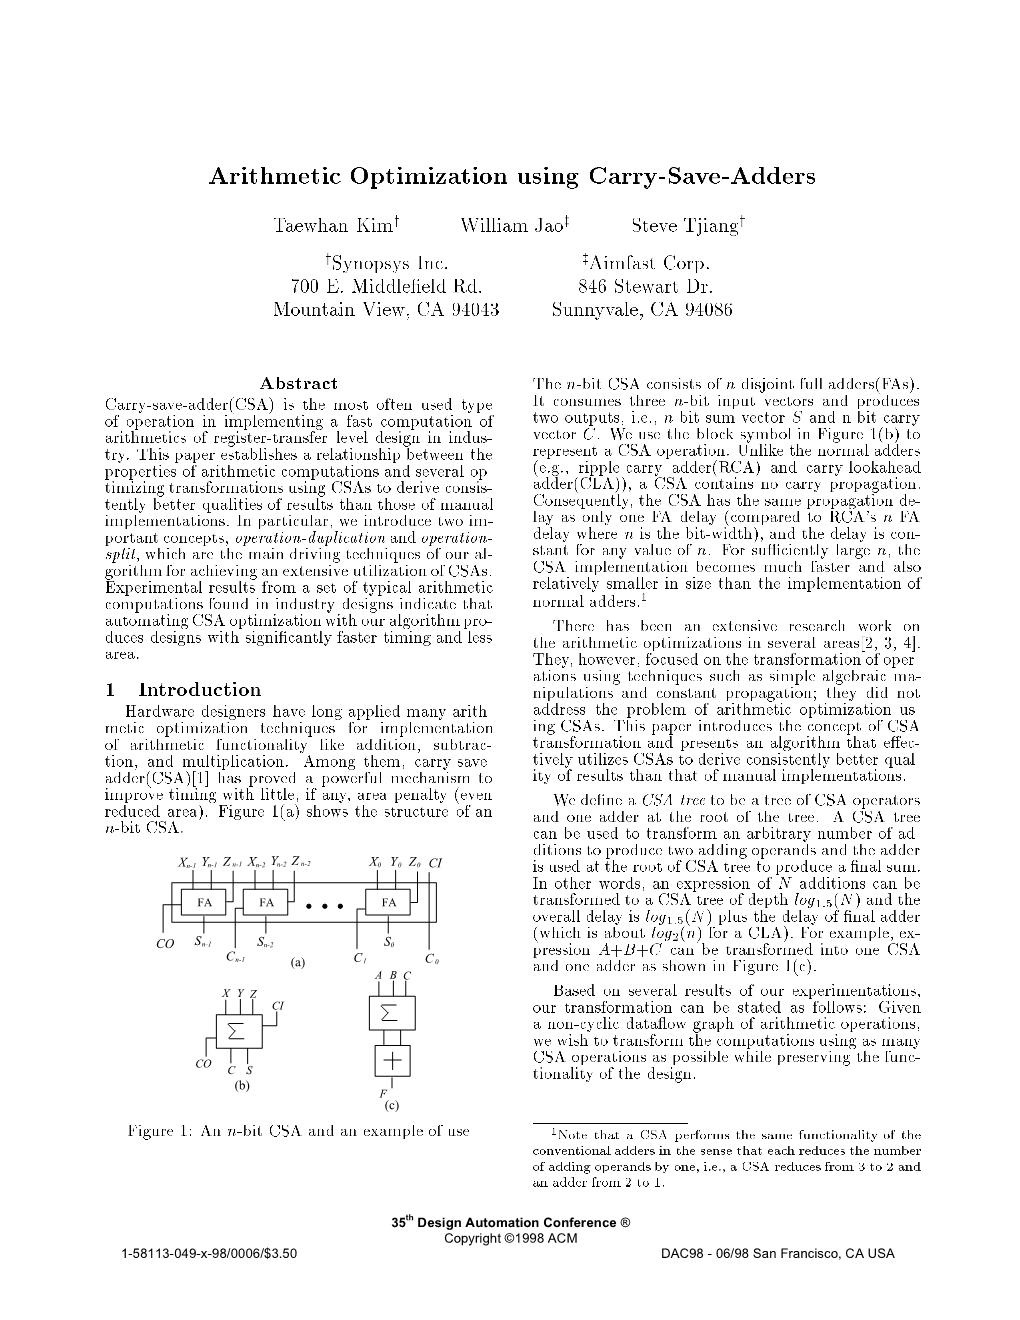 Arithmetic Optimization Using Carry-Save-Adders